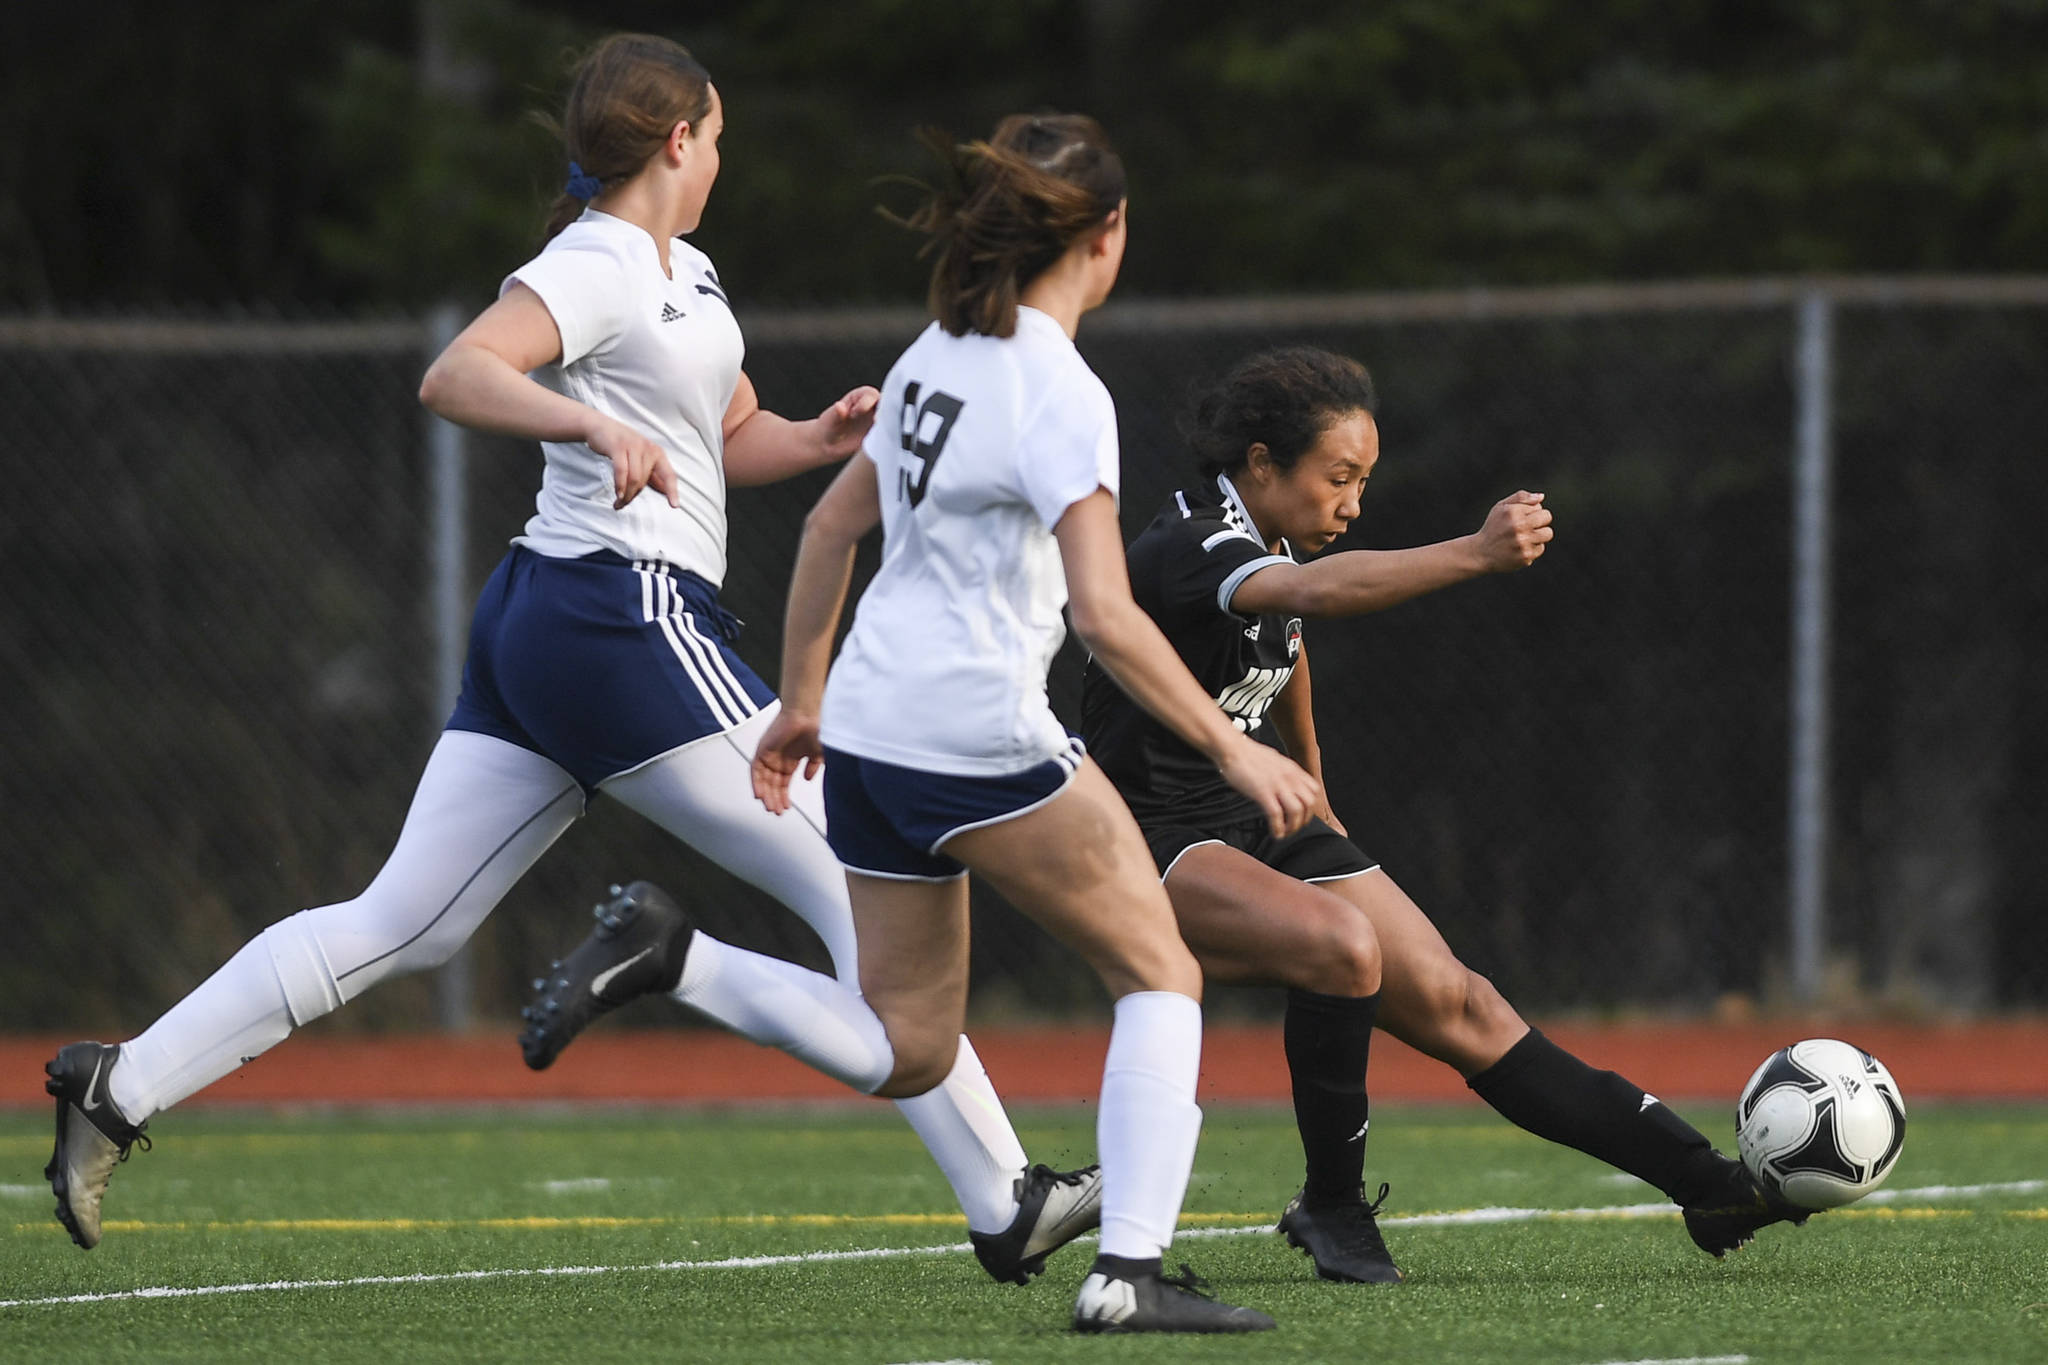 Juneau-Douglas’ Malia Miller, right, shoots and scores against Soldotna’s Sierra Longfellow, left, and Caleigh Glassmaker at Adair-Kennedy Memorial Field on Friday, April 26, 2019. JDHS won 4-0. (Michael Penn | Juneau Empire)